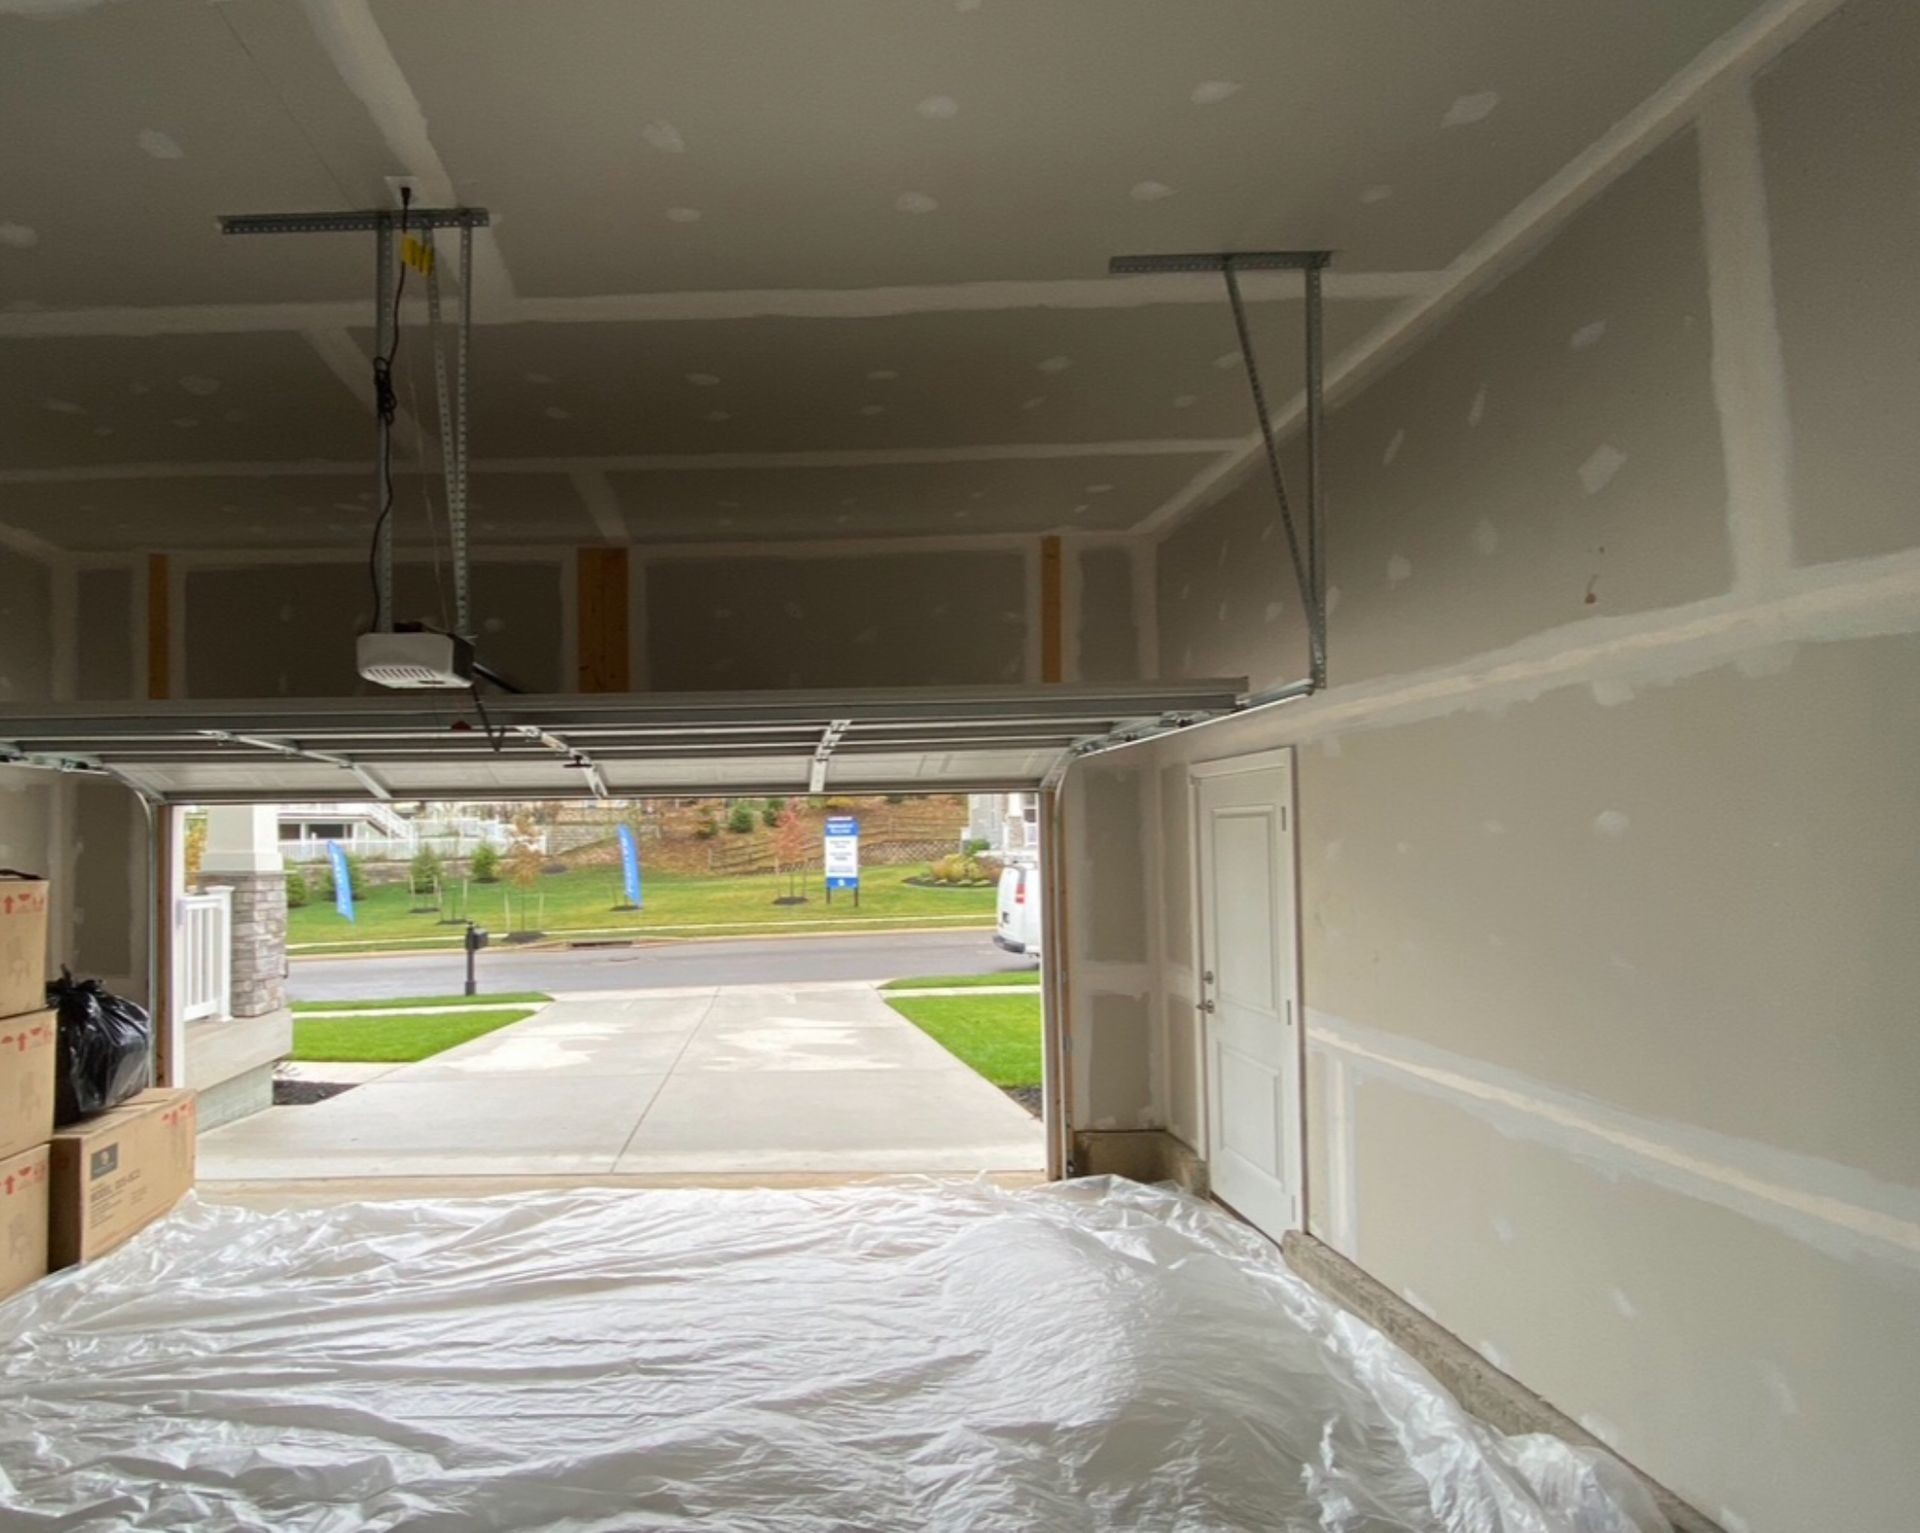 Garage Drywall finishing and painting in Perry Hall, Kingsville, Bel Air, Fallston, Timonium, Hunt Valley, Maryland 